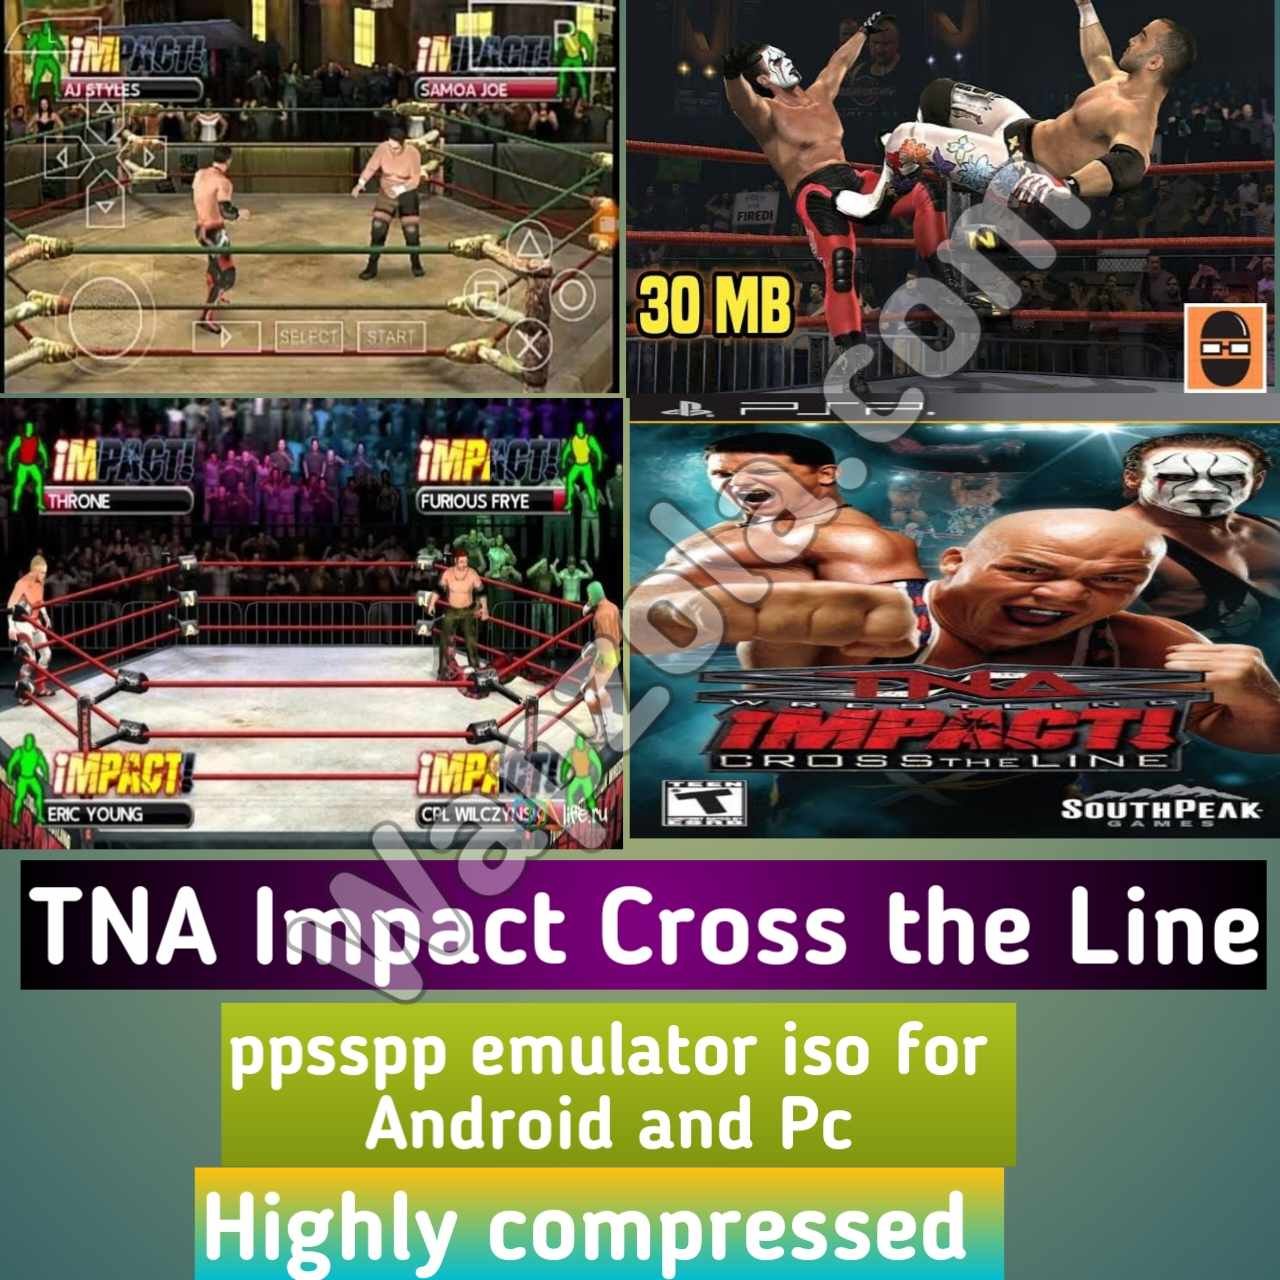 tna-impact-wrestling-ppsspp-iso-highly-compressed-apk-android-emulator